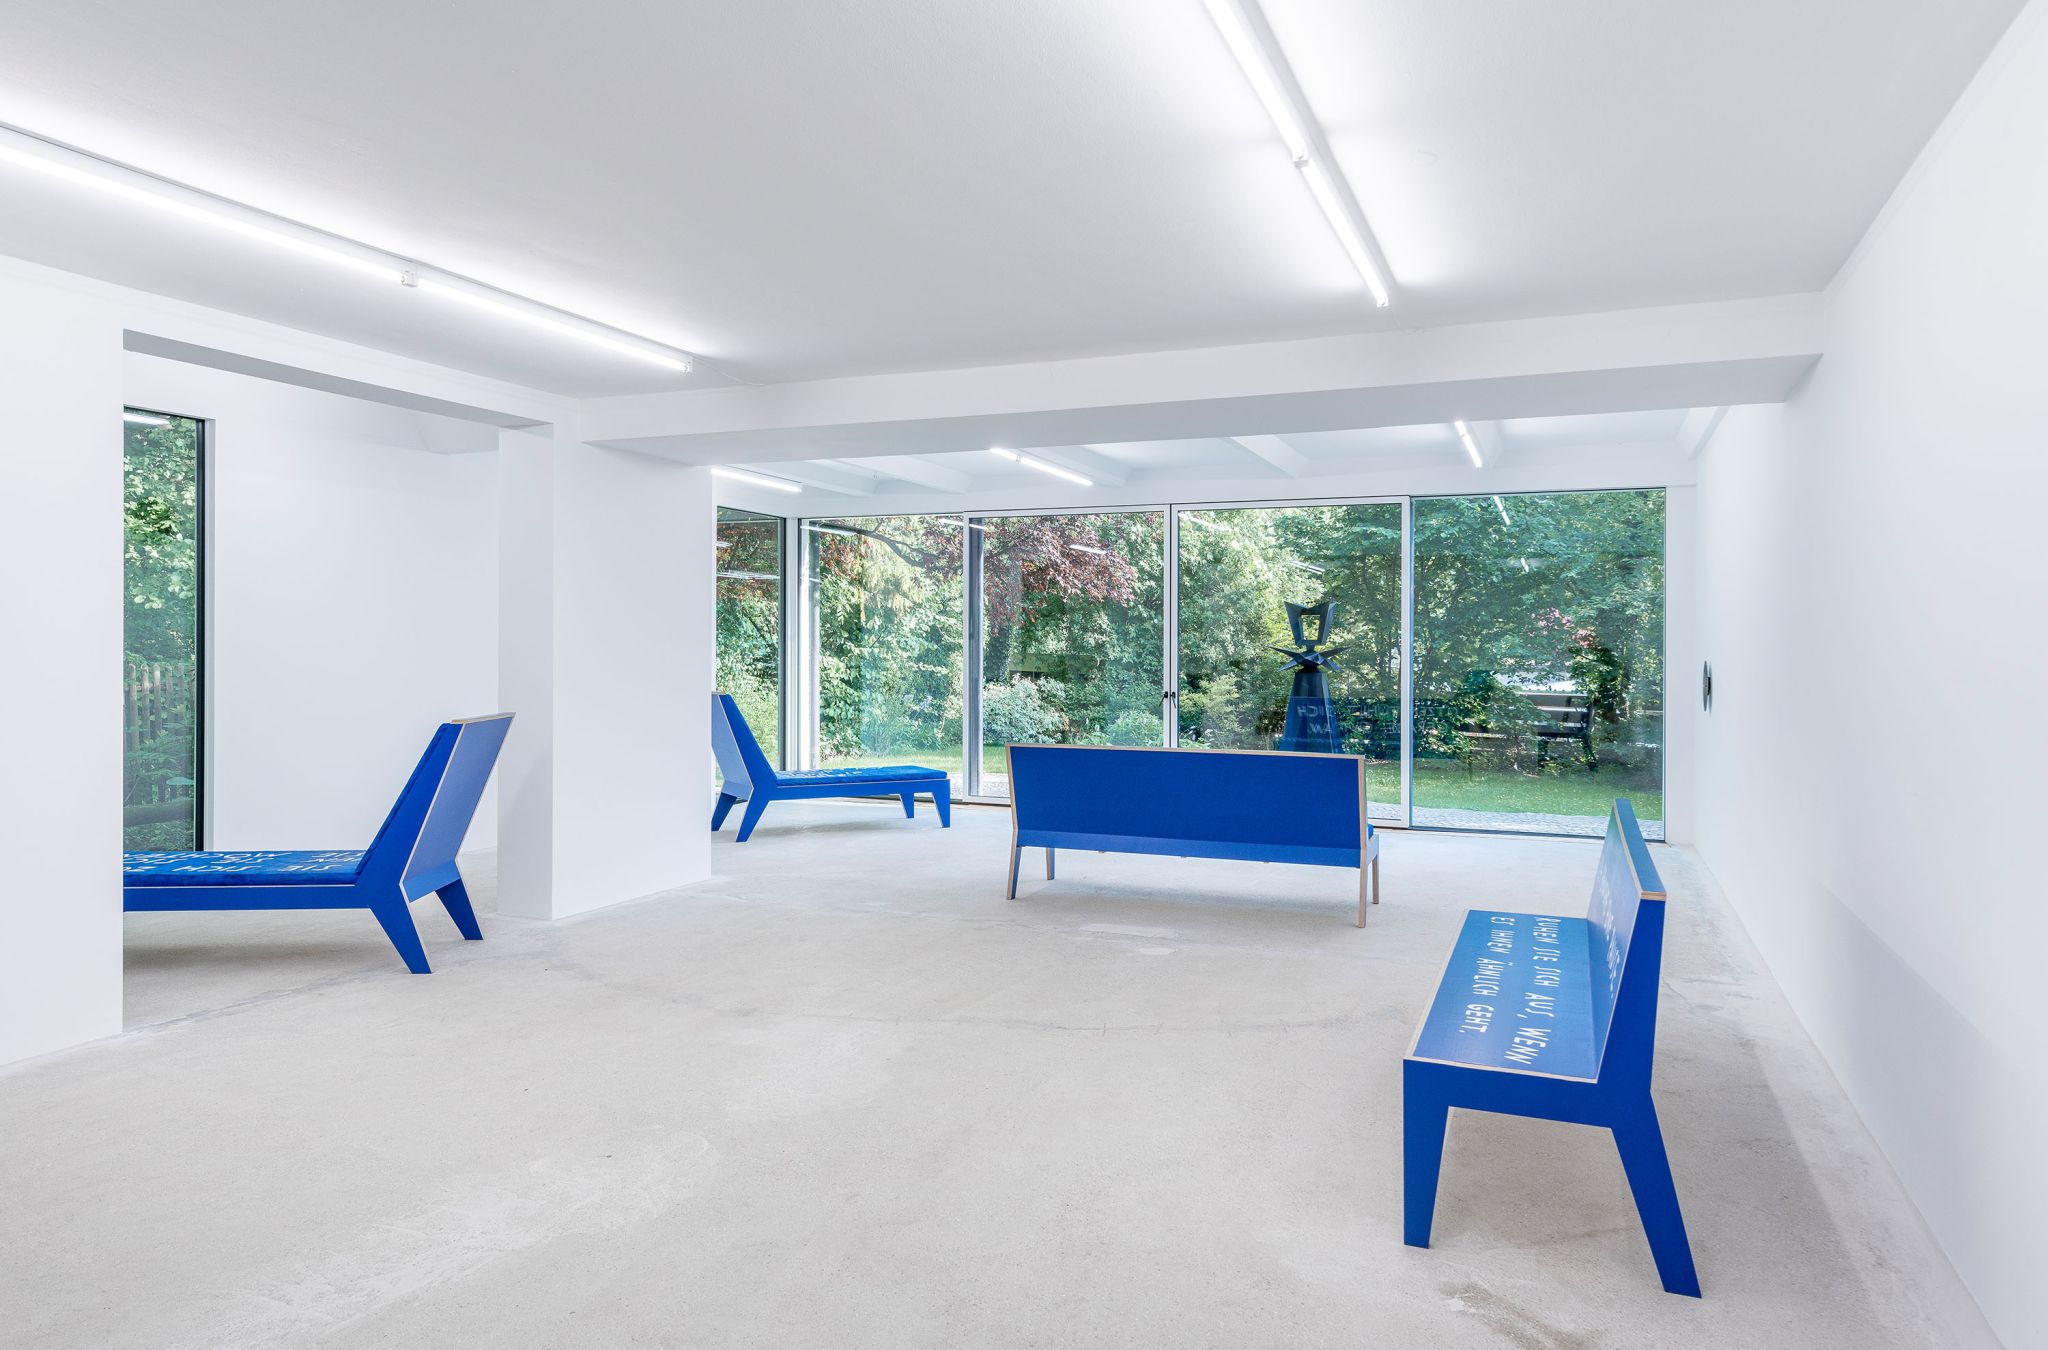 Finnegan Shannon, <em>Slower,</em> Installation view, Deborah Schamoni, 2022, Image description: Two blue chaise lounges and two blue benches in an exhibition room. They all face towards different windows into a garden.